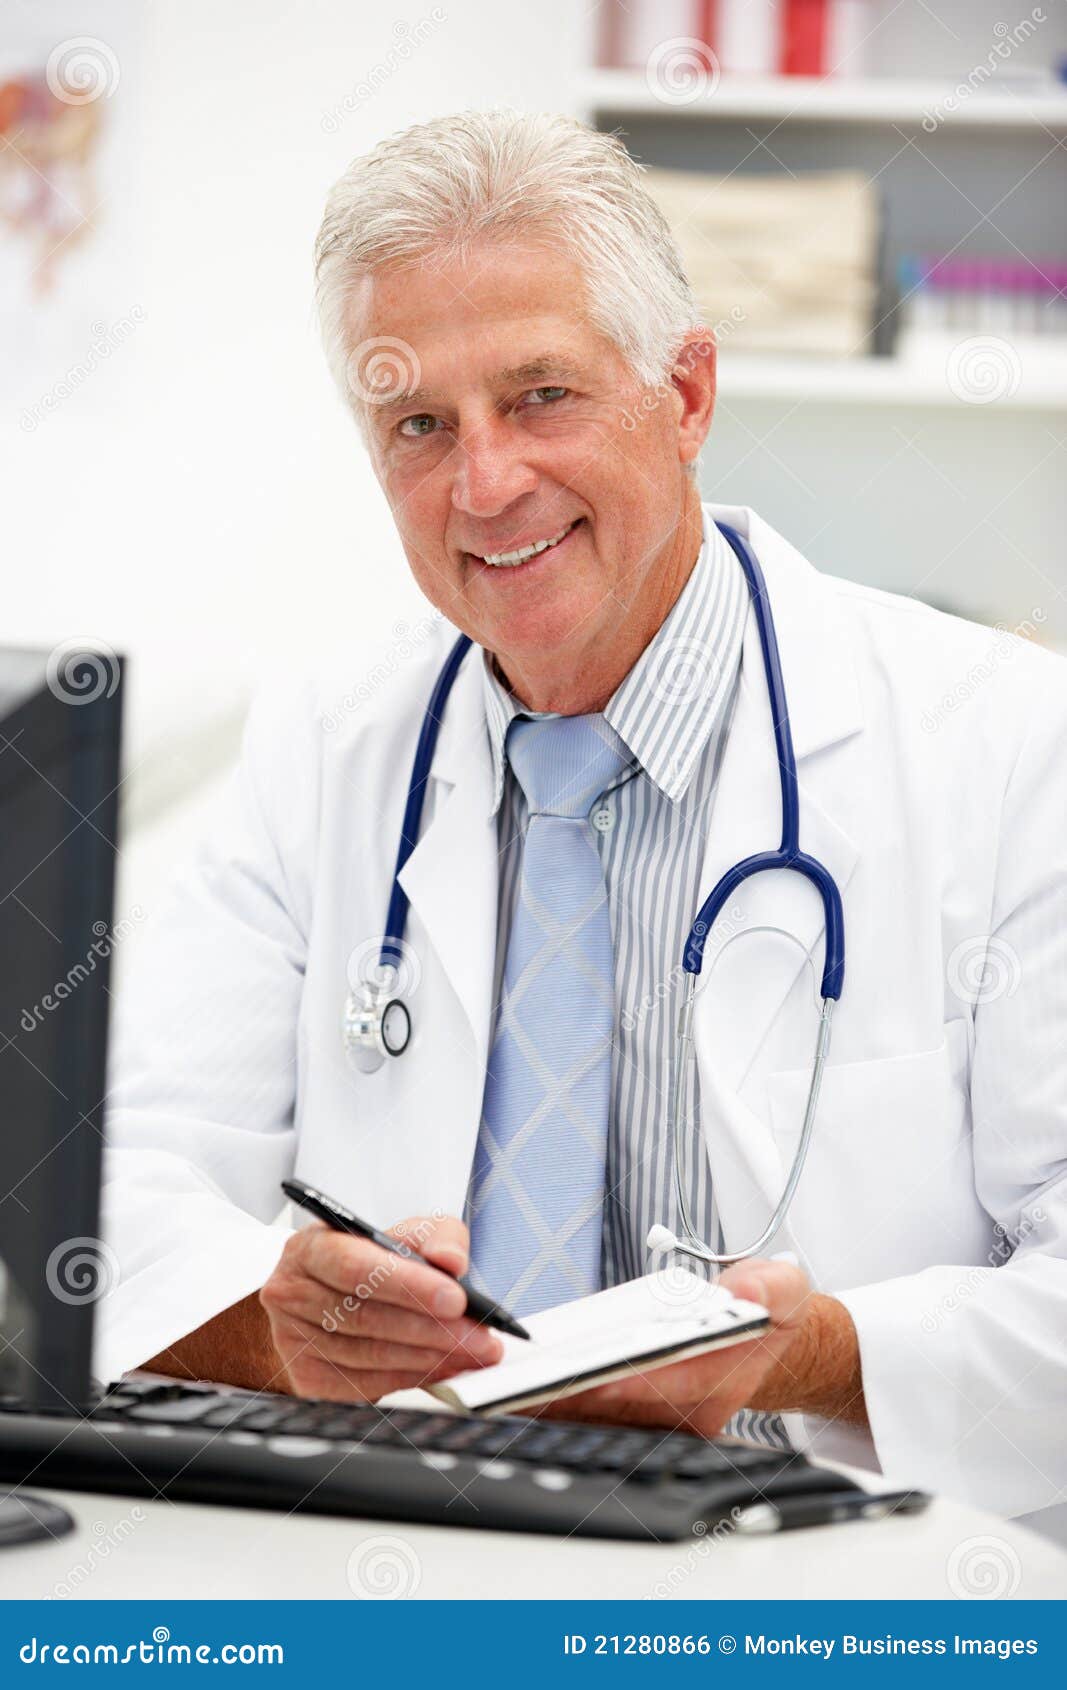 Senior Doctor at Desk Taking Notes Stock Photo - Image of doctor ...